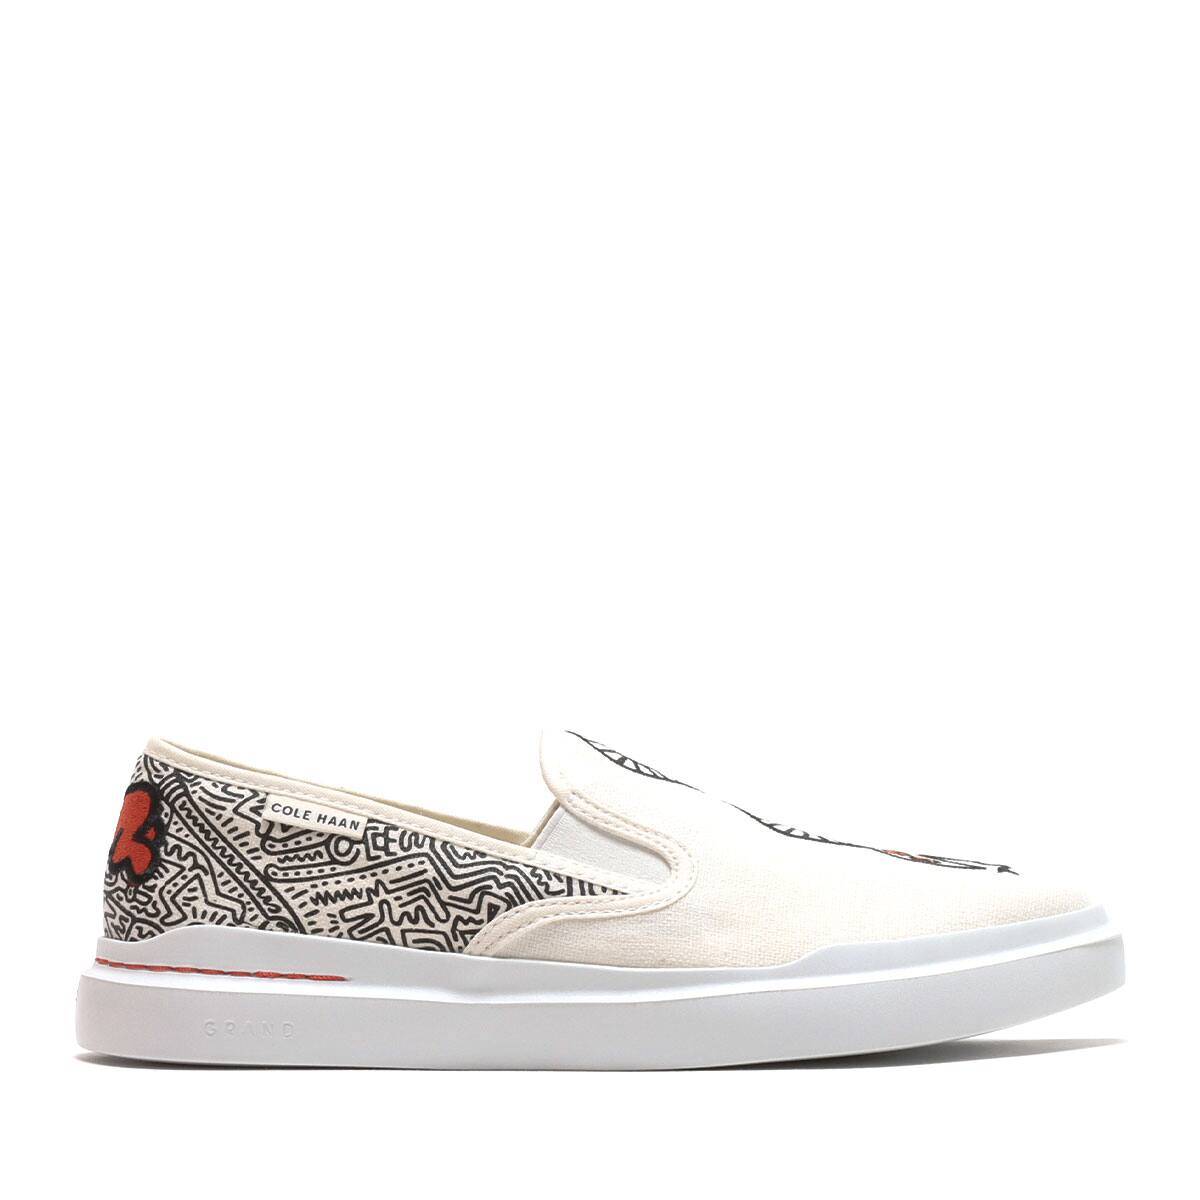 COLE HAAN x KEITH HARING GRANDPRO RALLY SLIPON WHITE/BLACK/FLAME